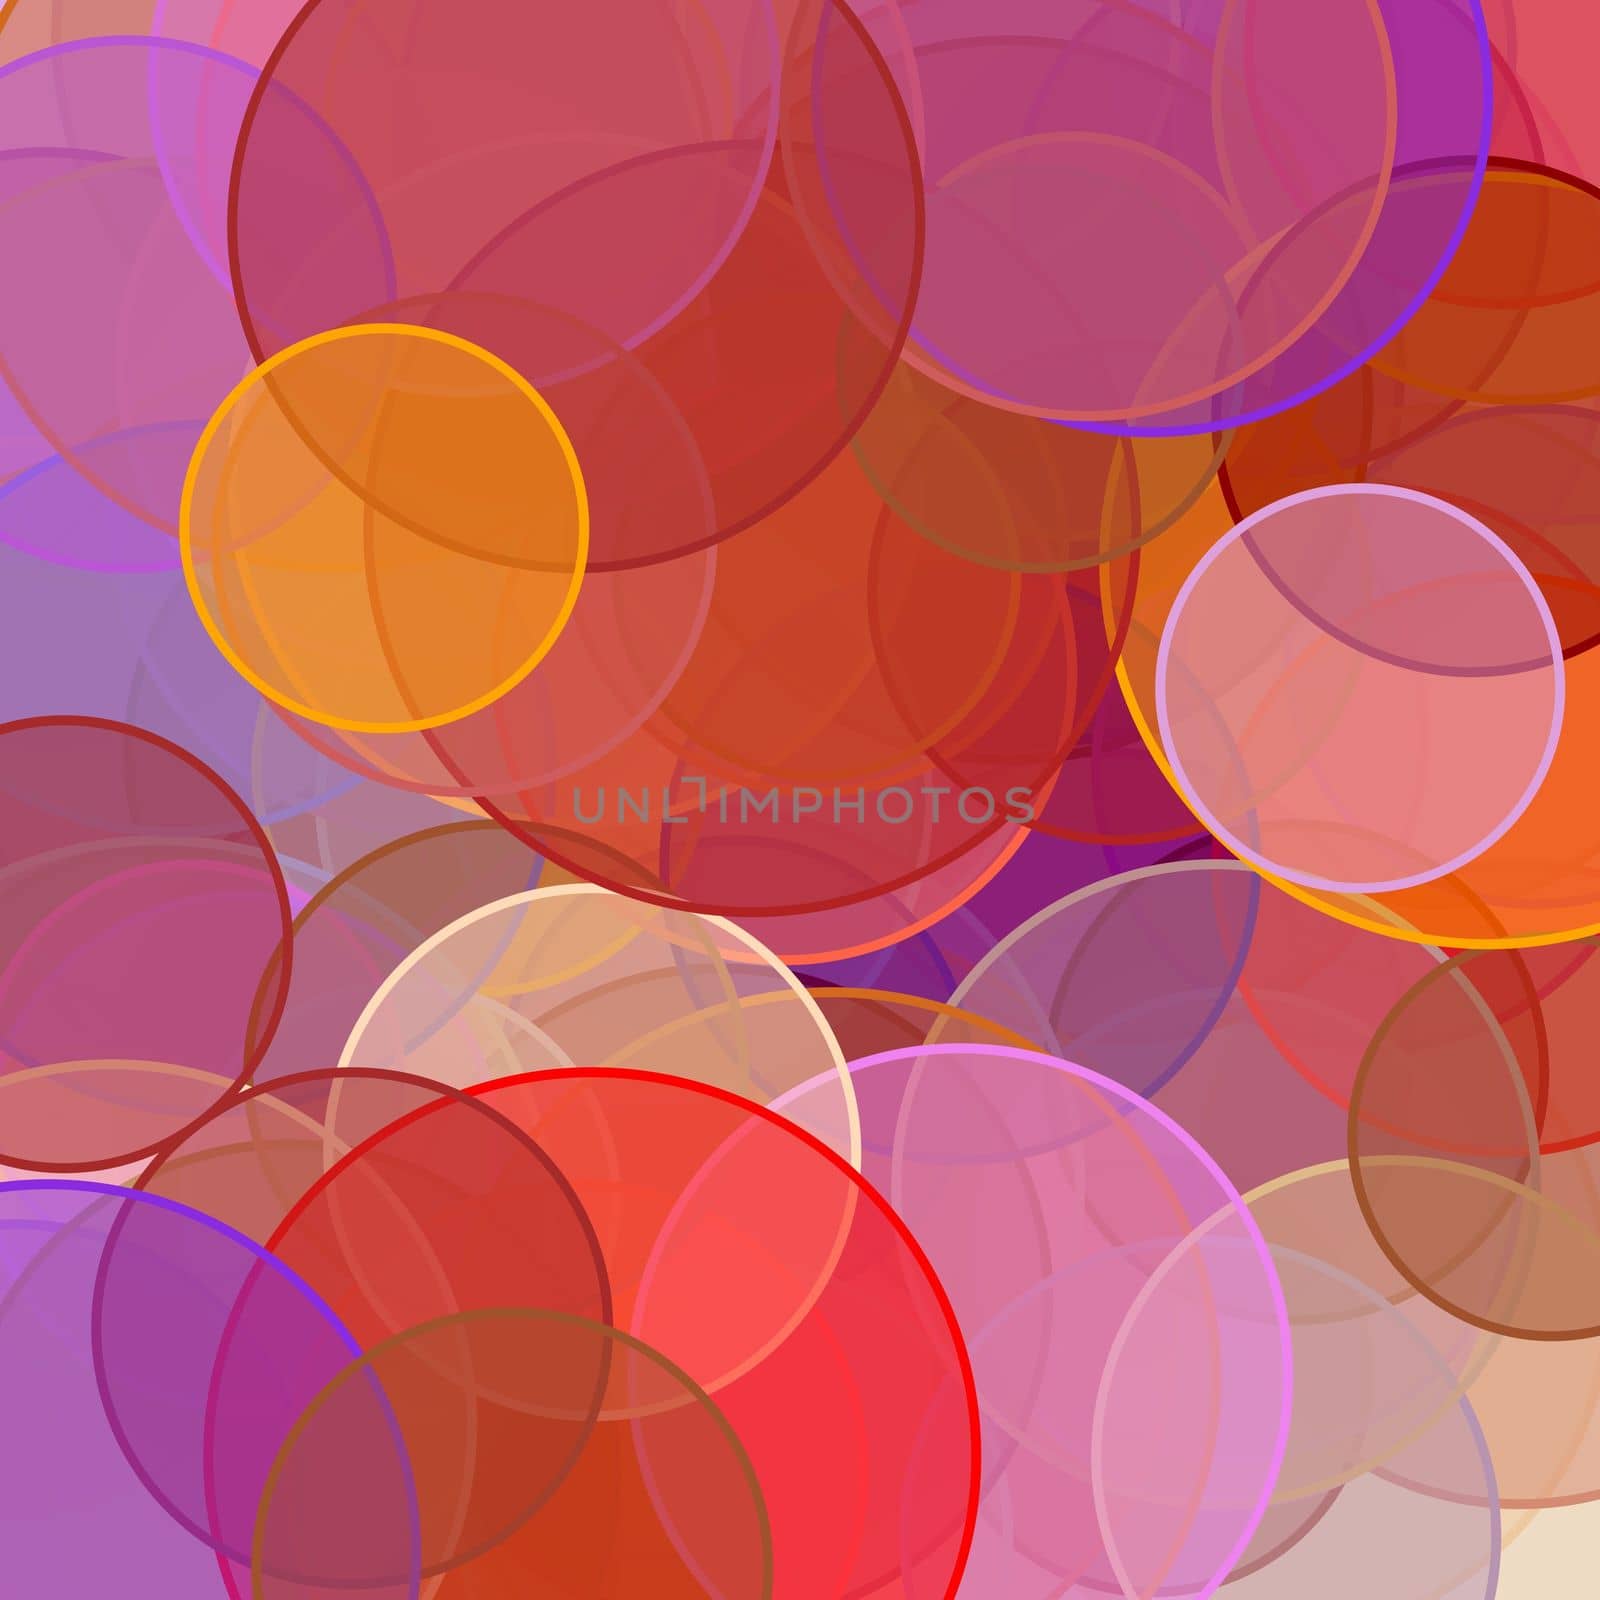 Abstract minimalist red orange brown violet illustration with circles useful as a background